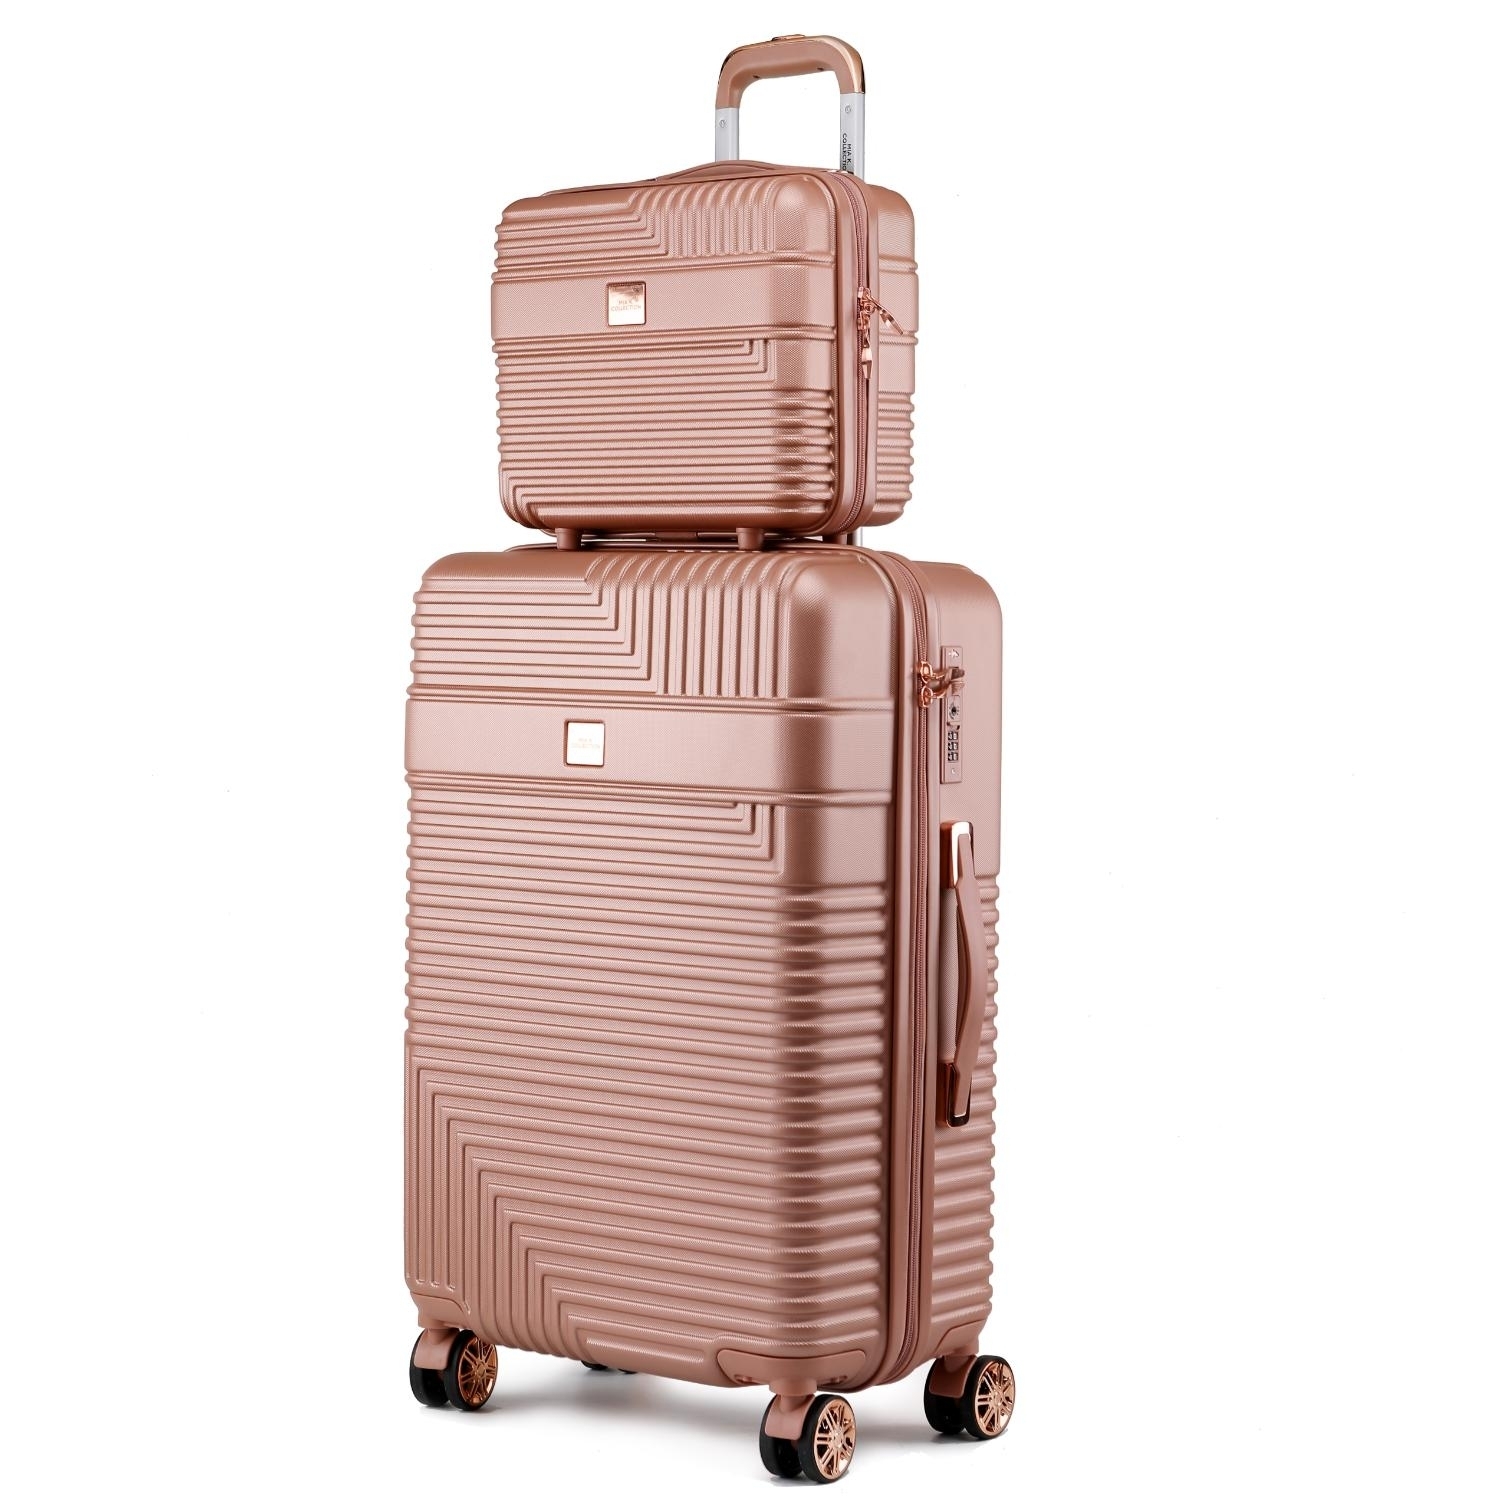 MKF Collection Mykonos Luggage Set With A Medium Carry-on And Small Cosmetic Case 2 Pieces By Mia K - Rose Gold